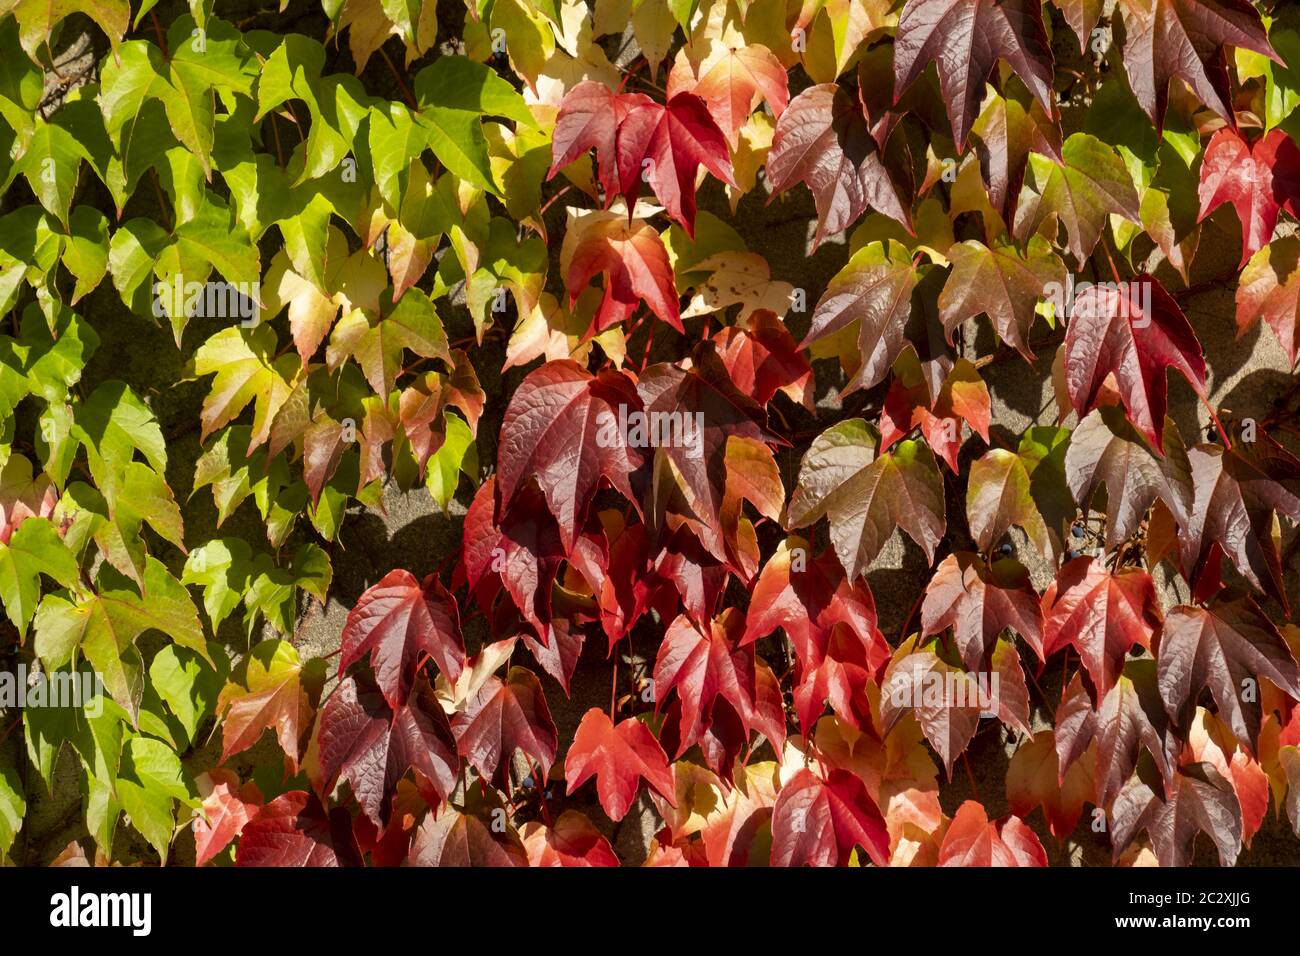 Wild wine is vine on a house wall Stock Photo